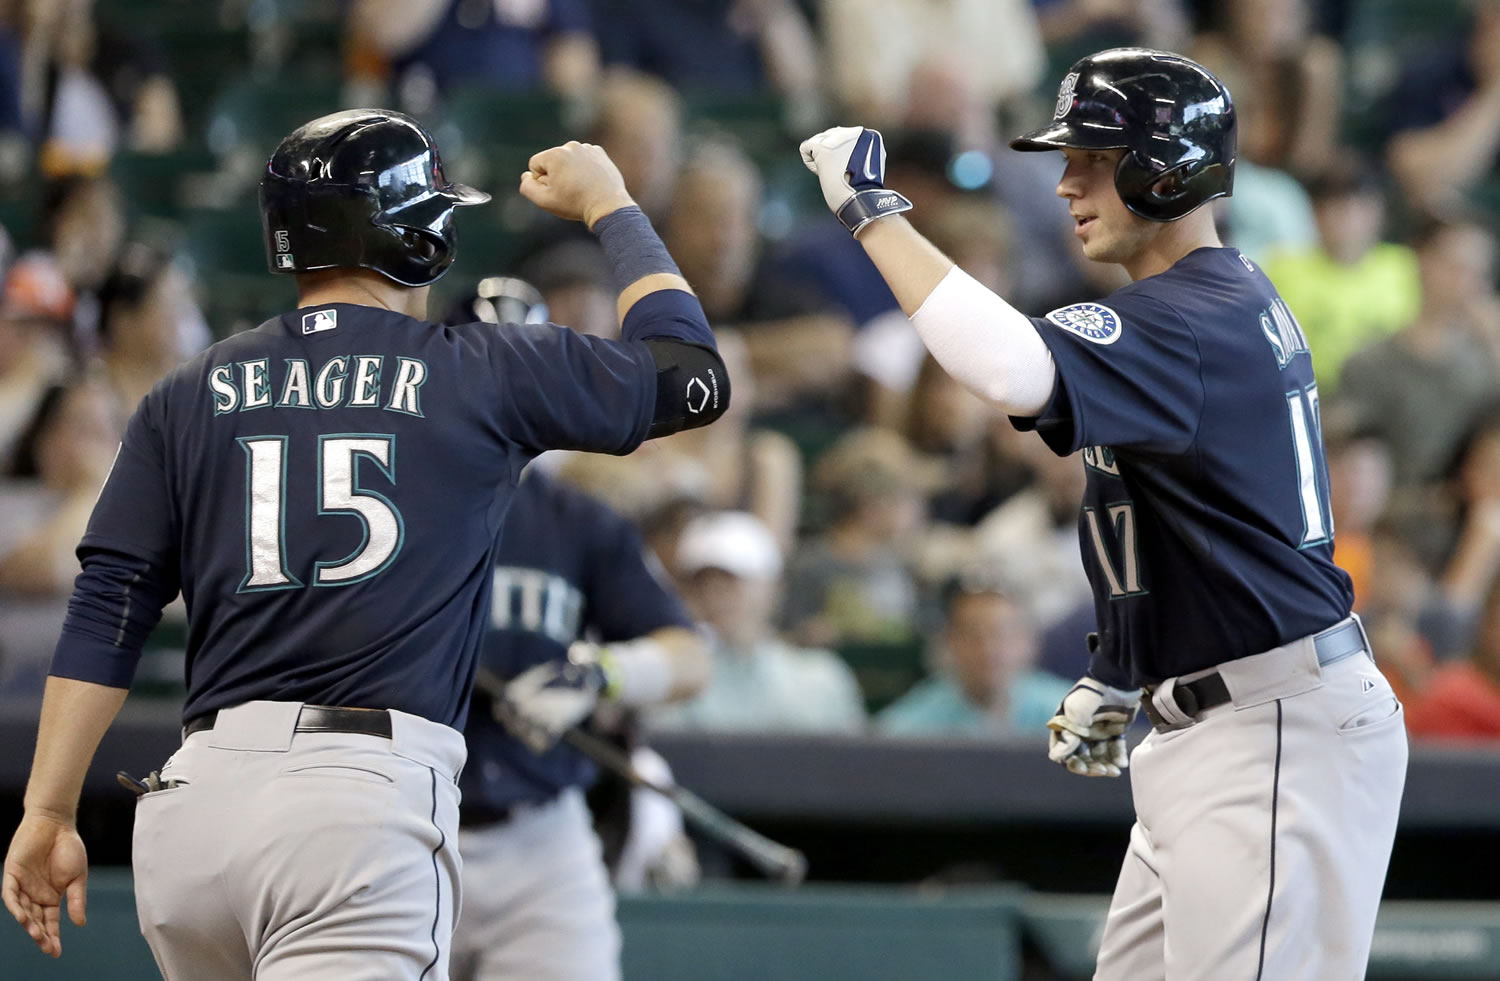 Seattle Mariners' Justin Smoak (17) is welcomed home by teammate Kyle Seager (15) on a two-run home run against the Houston Astros in the seventh inning of a baseball game on Saturday, May 3, 2014, in Houston.